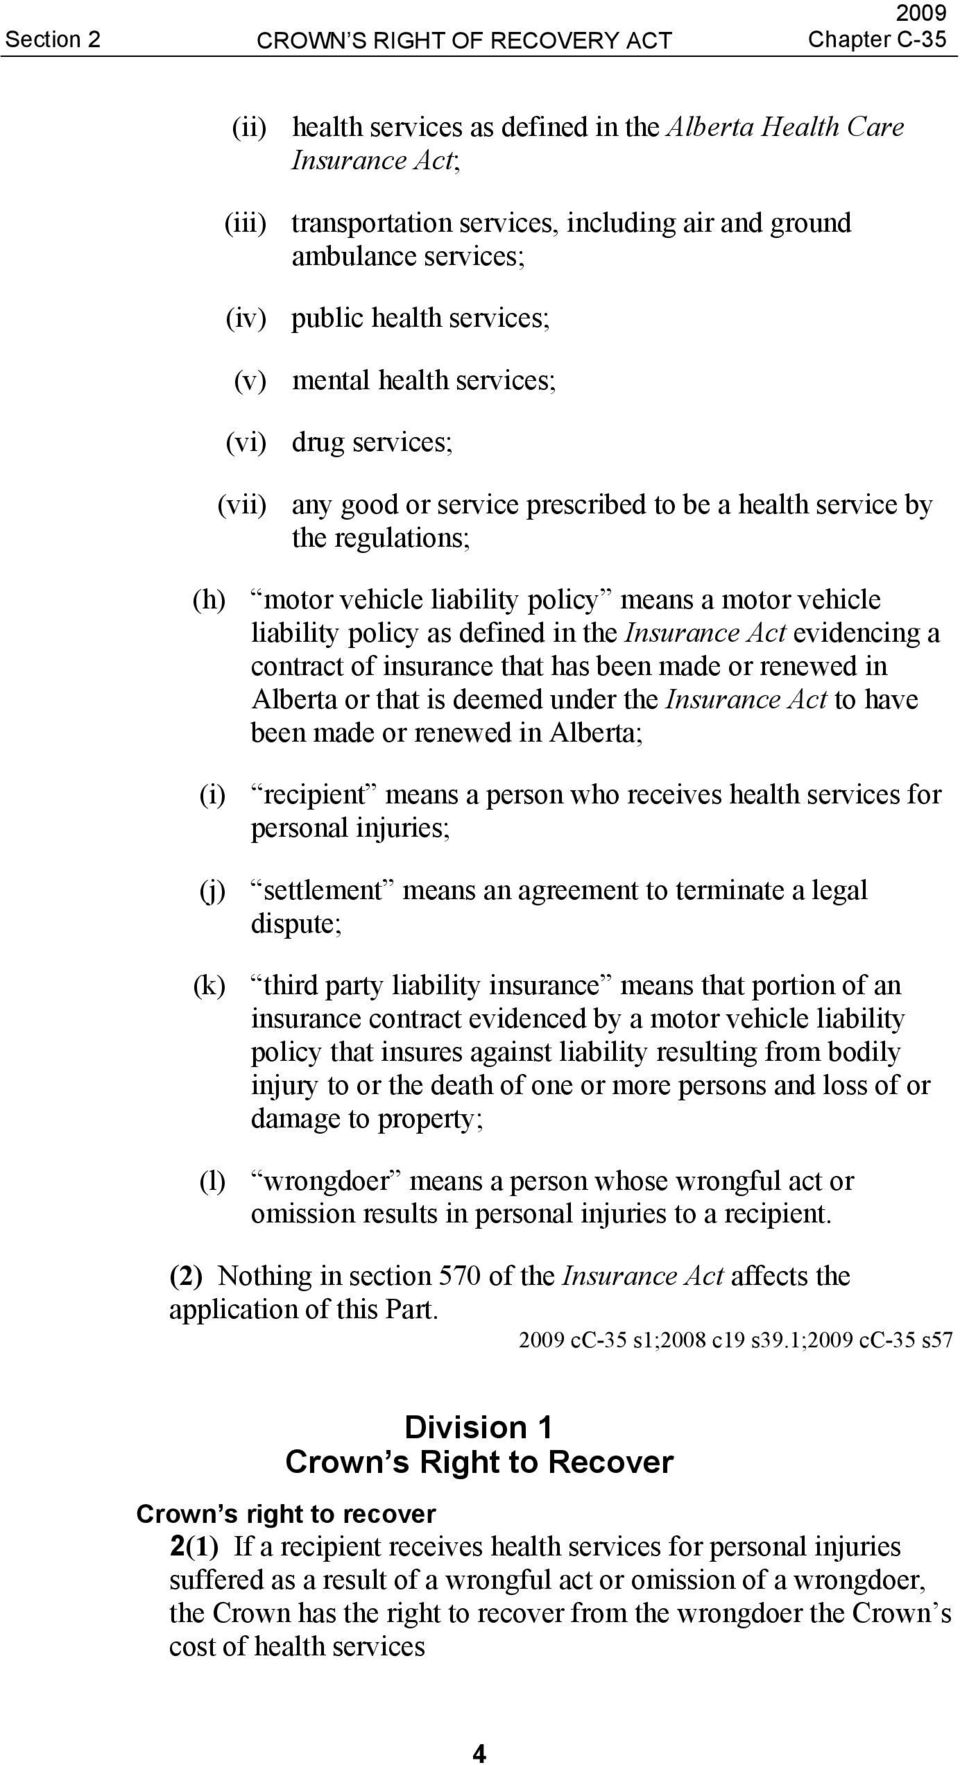 motor vehicle liability policy as defined in the Insurance Act evidencing a contract of insurance that has been made or renewed in Alberta or that is deemed under the Insurance Act to have been made